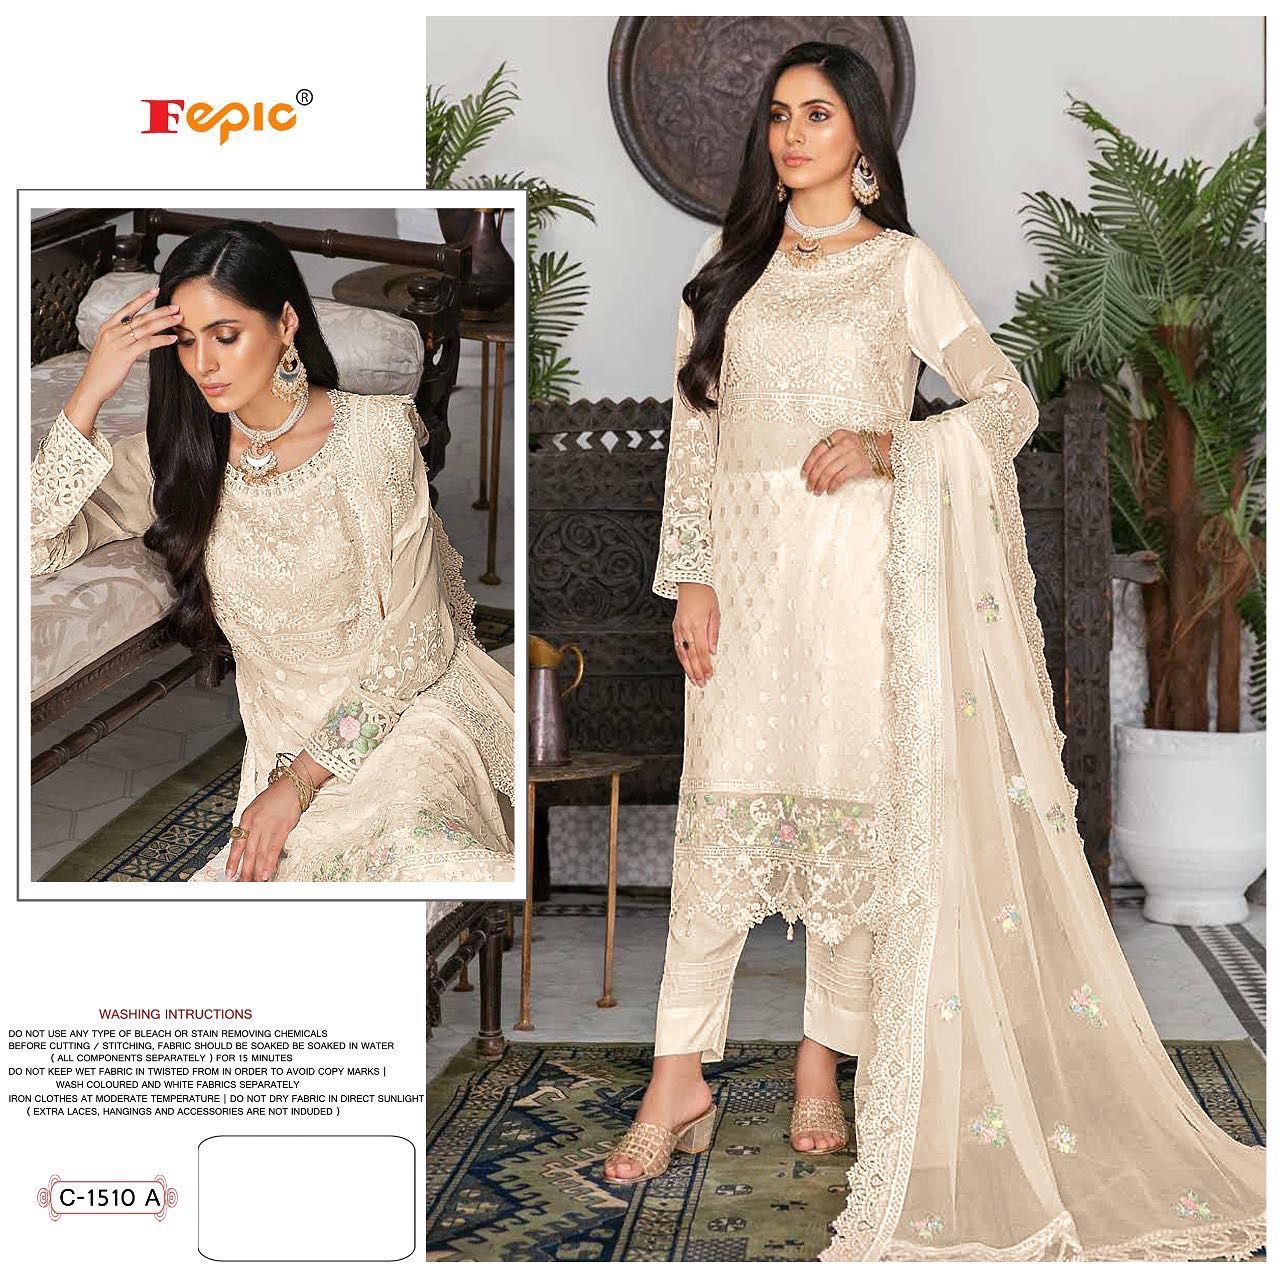 FEPIC C 1510 A ROSEMEEN PAKISTANI SUITS IN INDIA